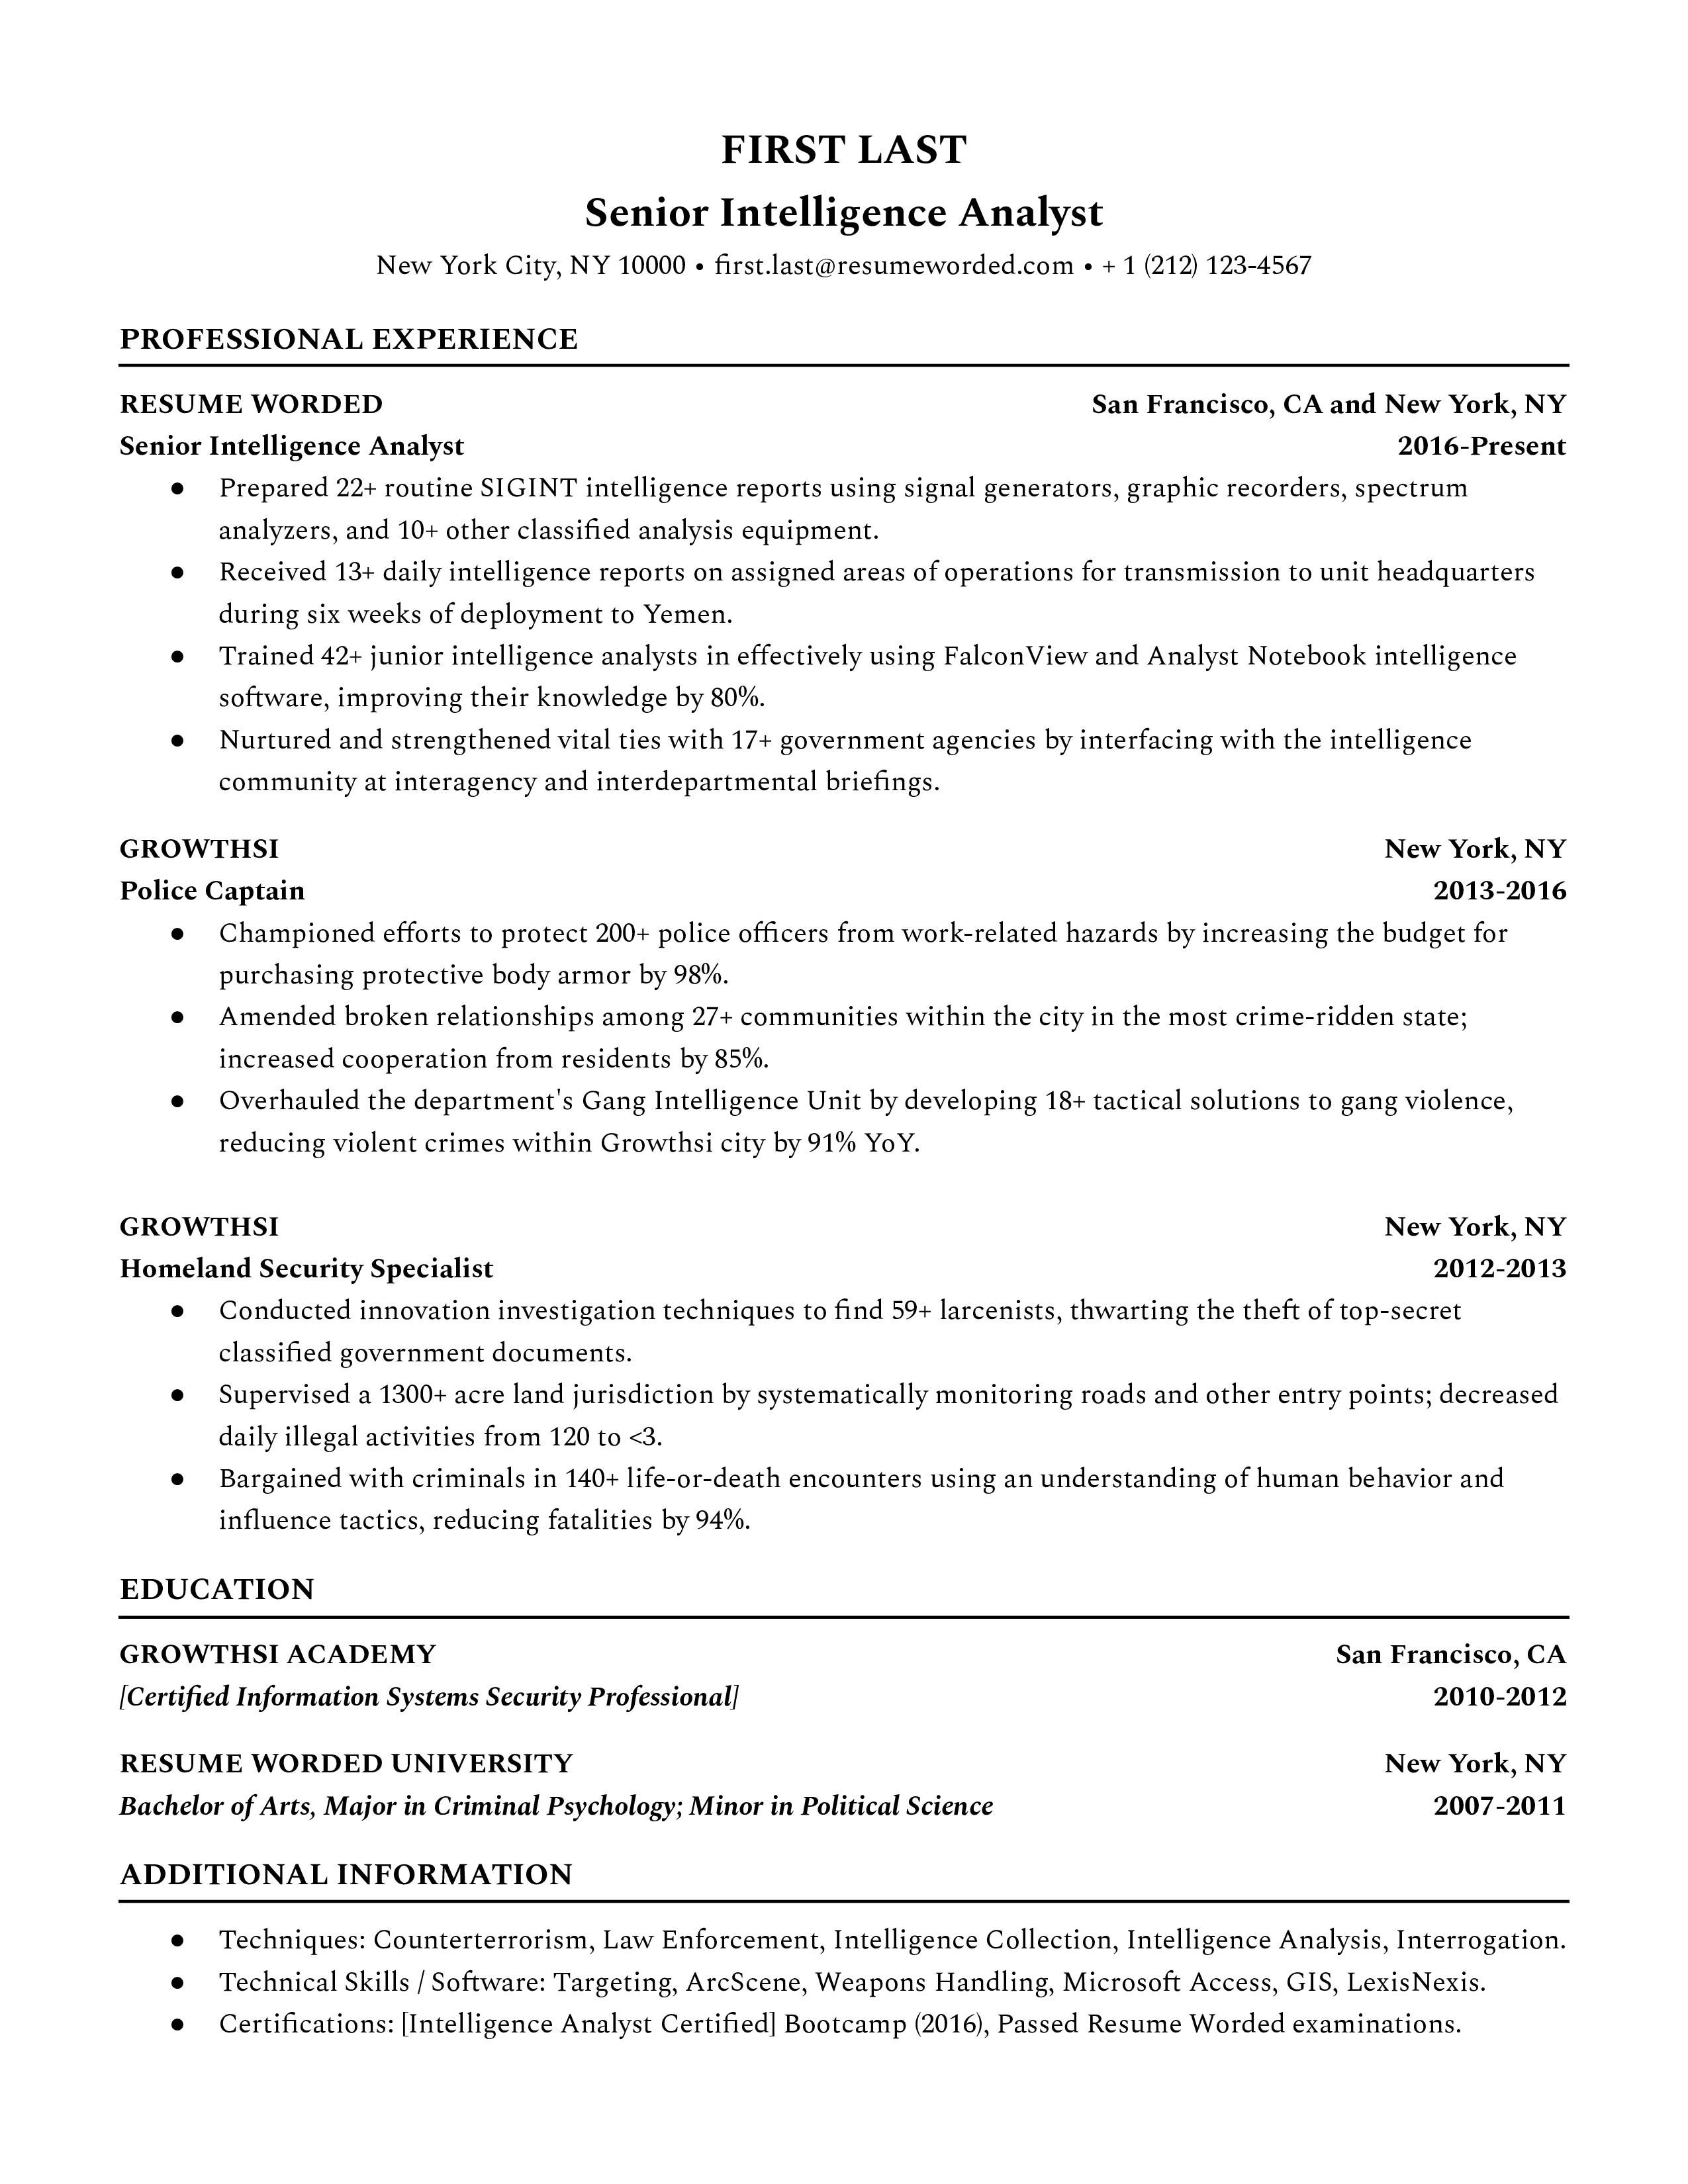 A senior intelligence analyst resume template highlighting their educational background.